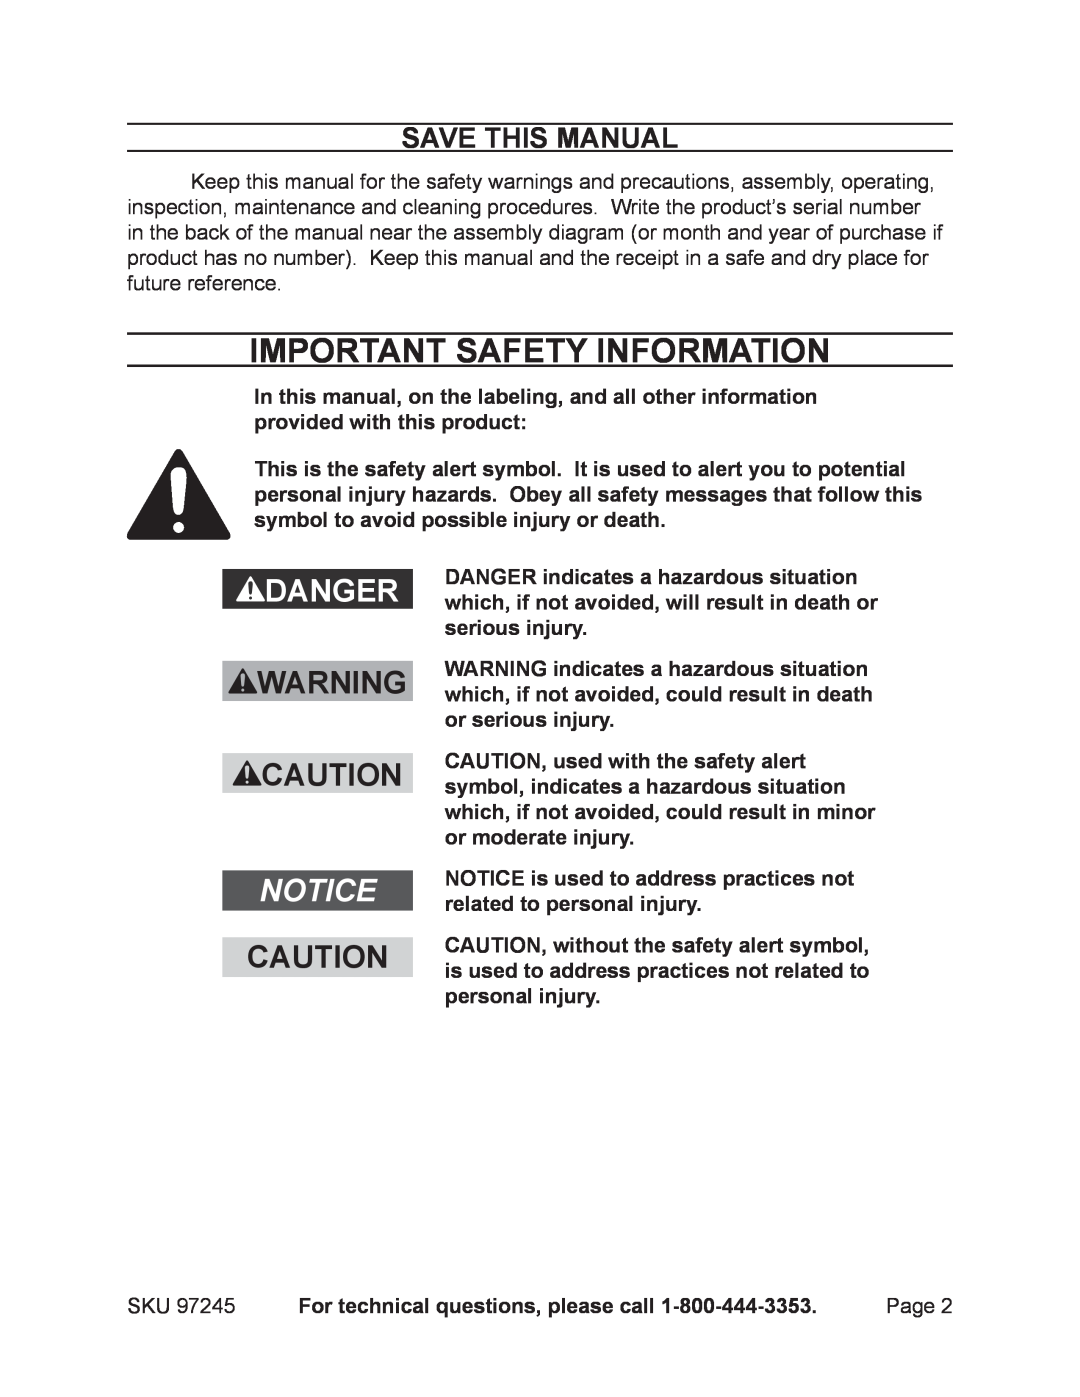 Harbor Freight Tools 97245 Important SAFETY Information, Save This Manual, For technical questions, please call, Danger 